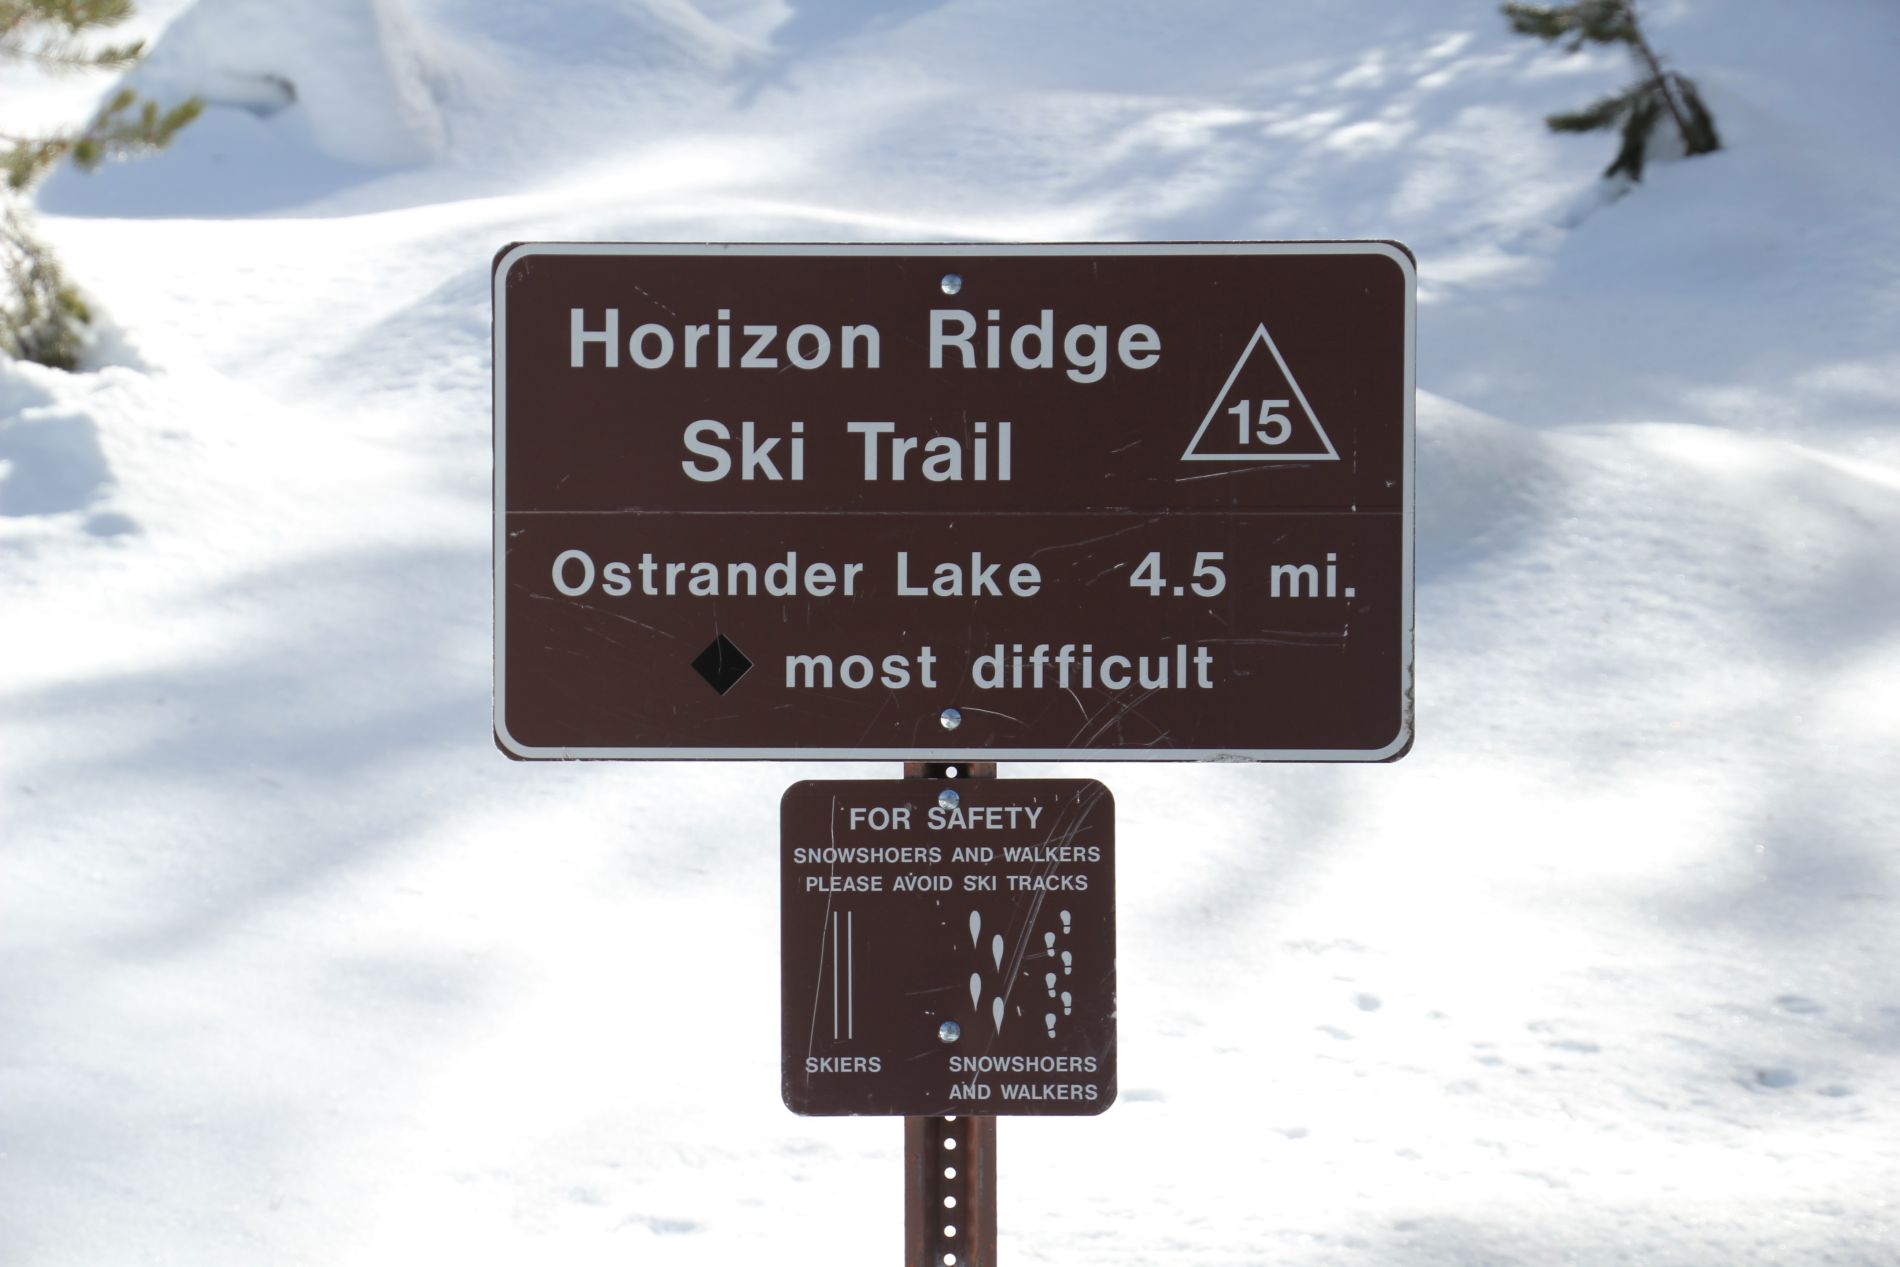 The Horizon Ridge Ski Trail signs warns that the route is 